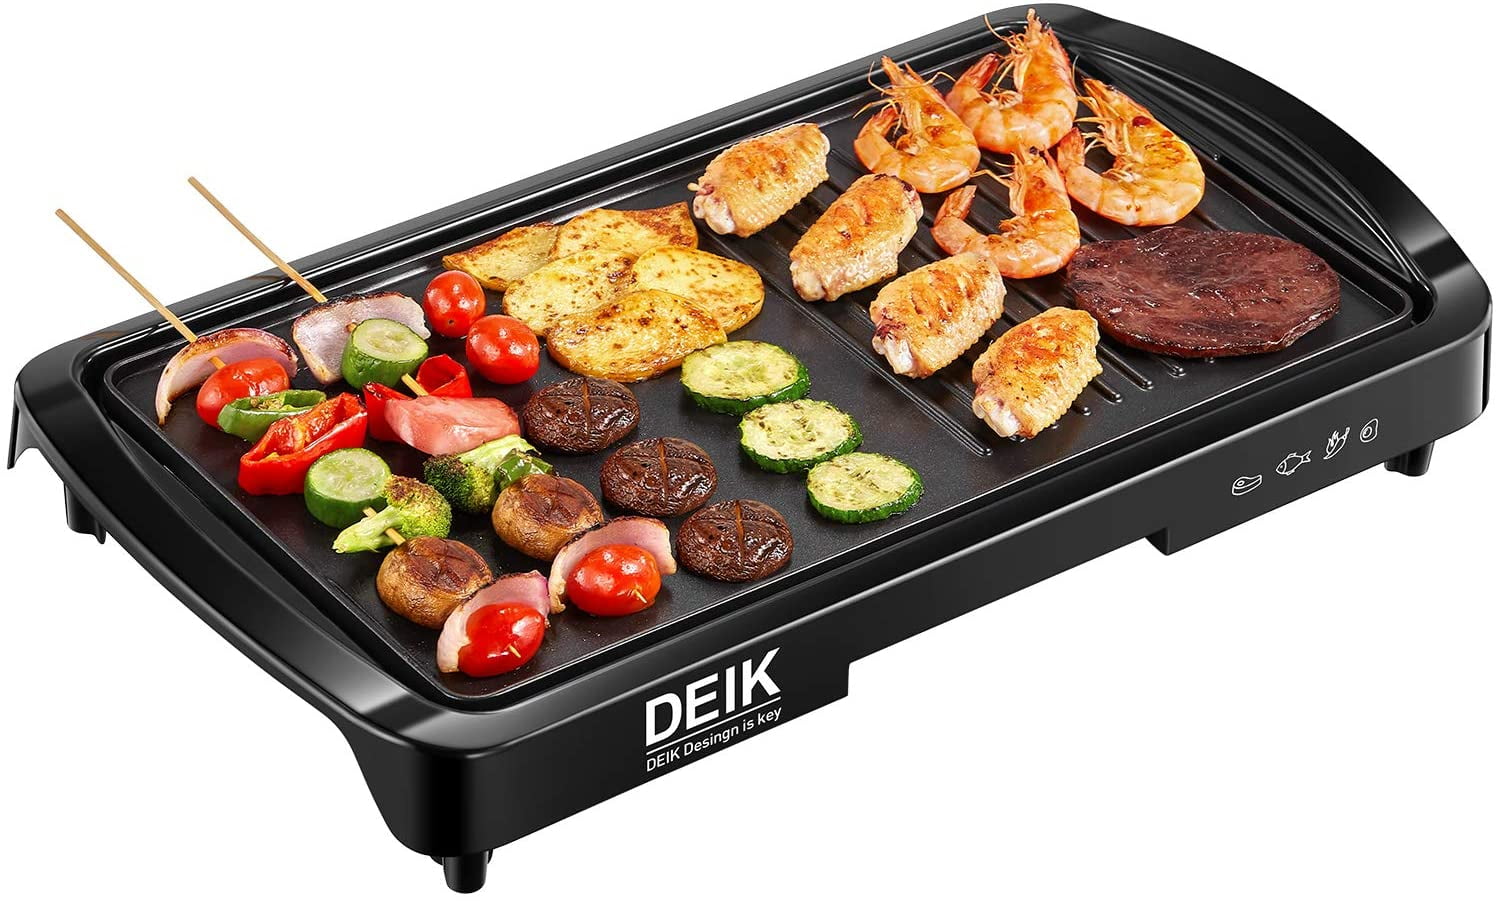 dsp 2000w electric contact griddles household